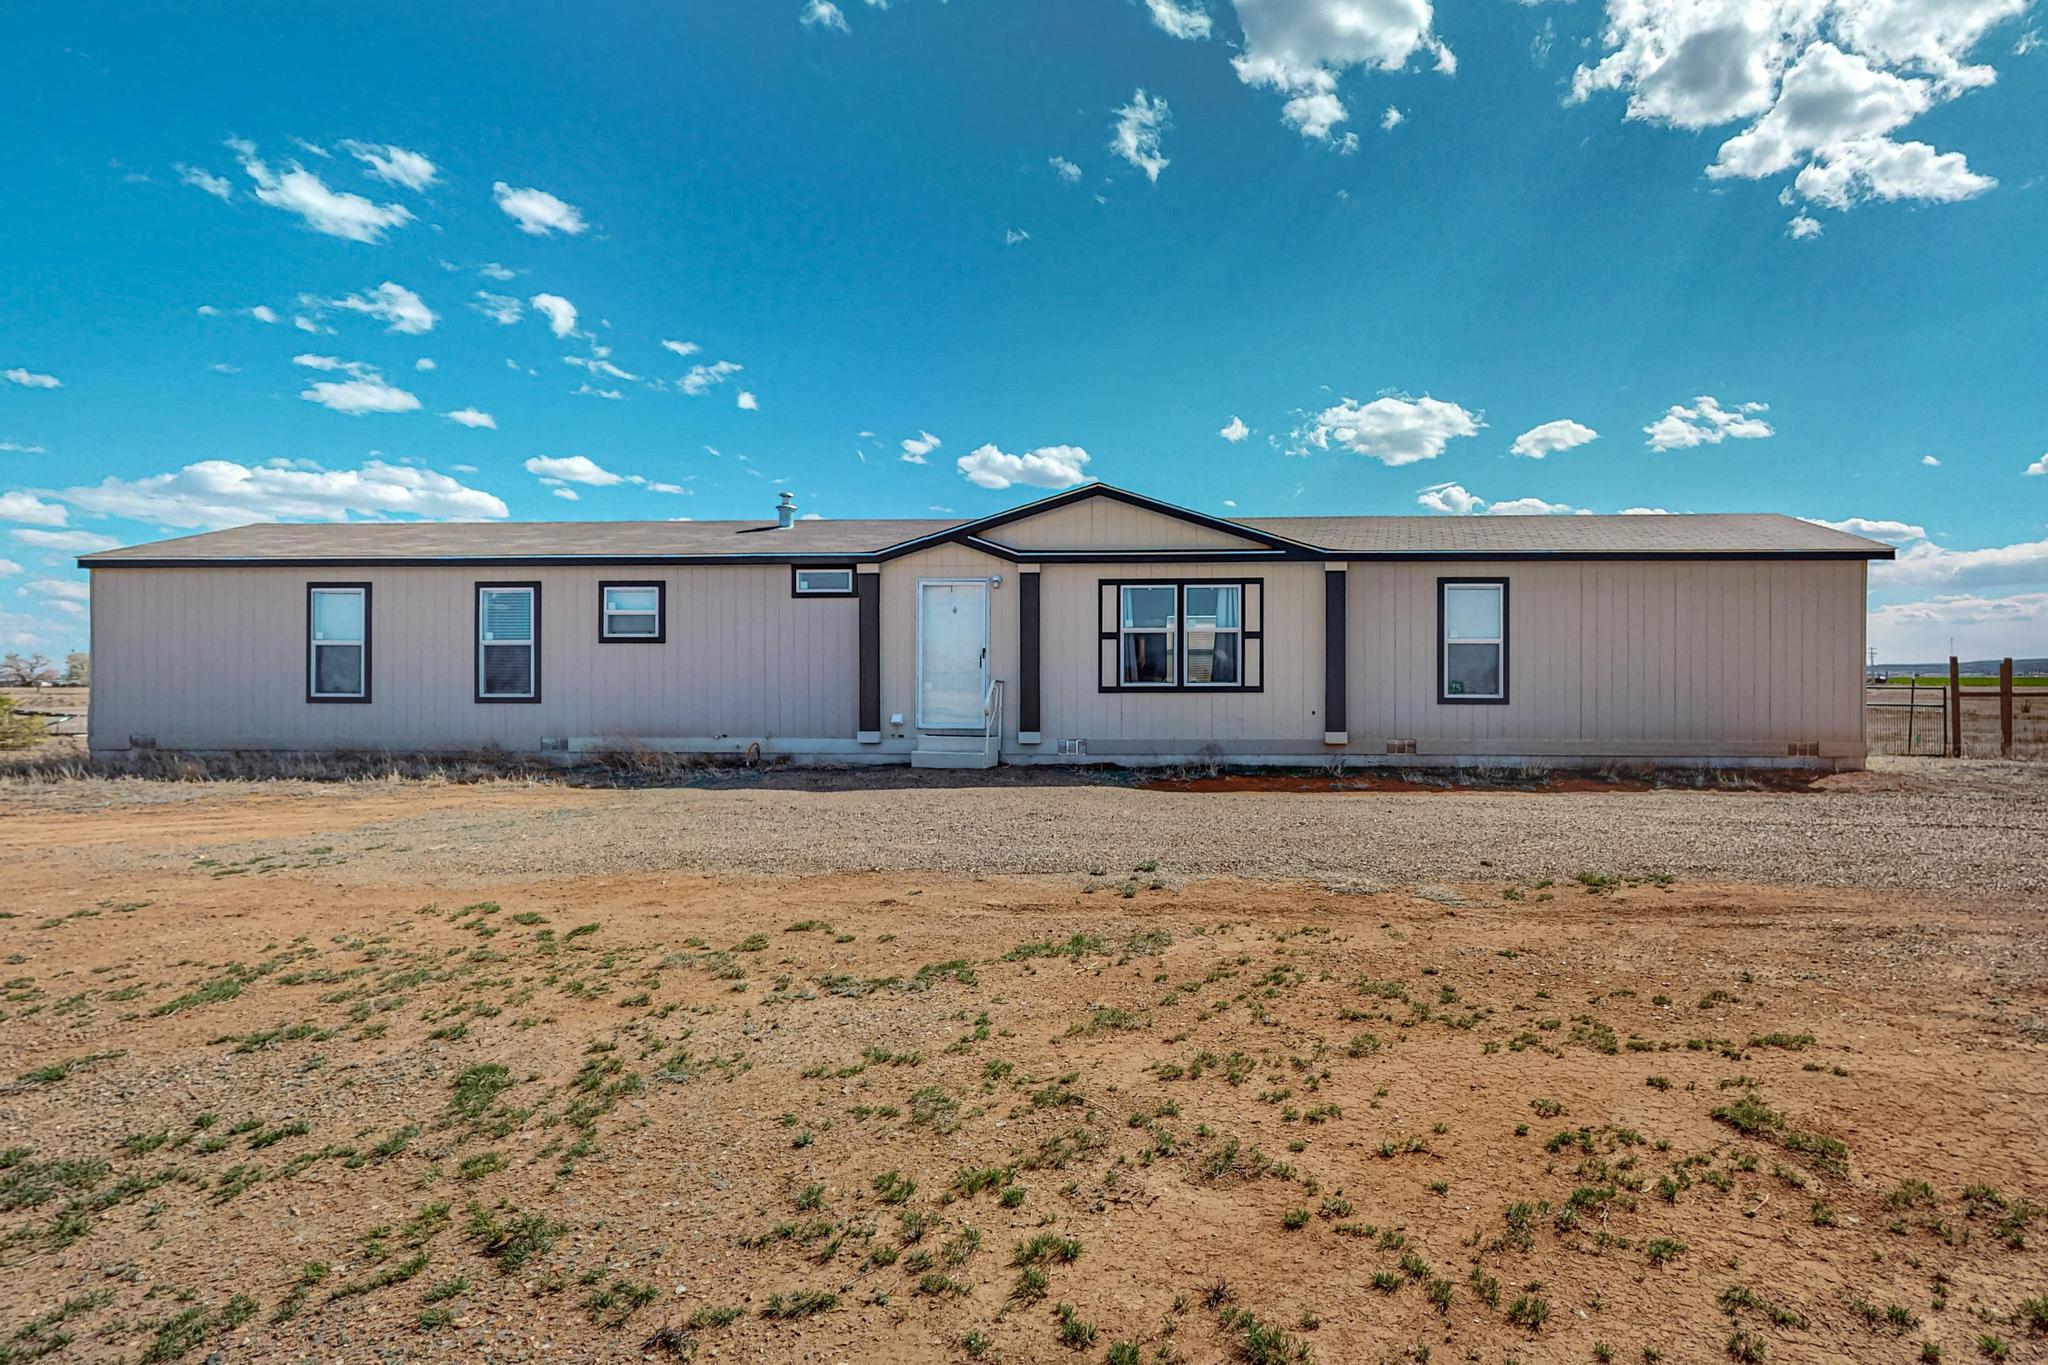 15 Capitan Street, Moriarty, New Mexico 87035, 3 Bedrooms Bedrooms, ,2 BathroomsBathrooms,Residential,For Sale,15 Capitan Street,1061420